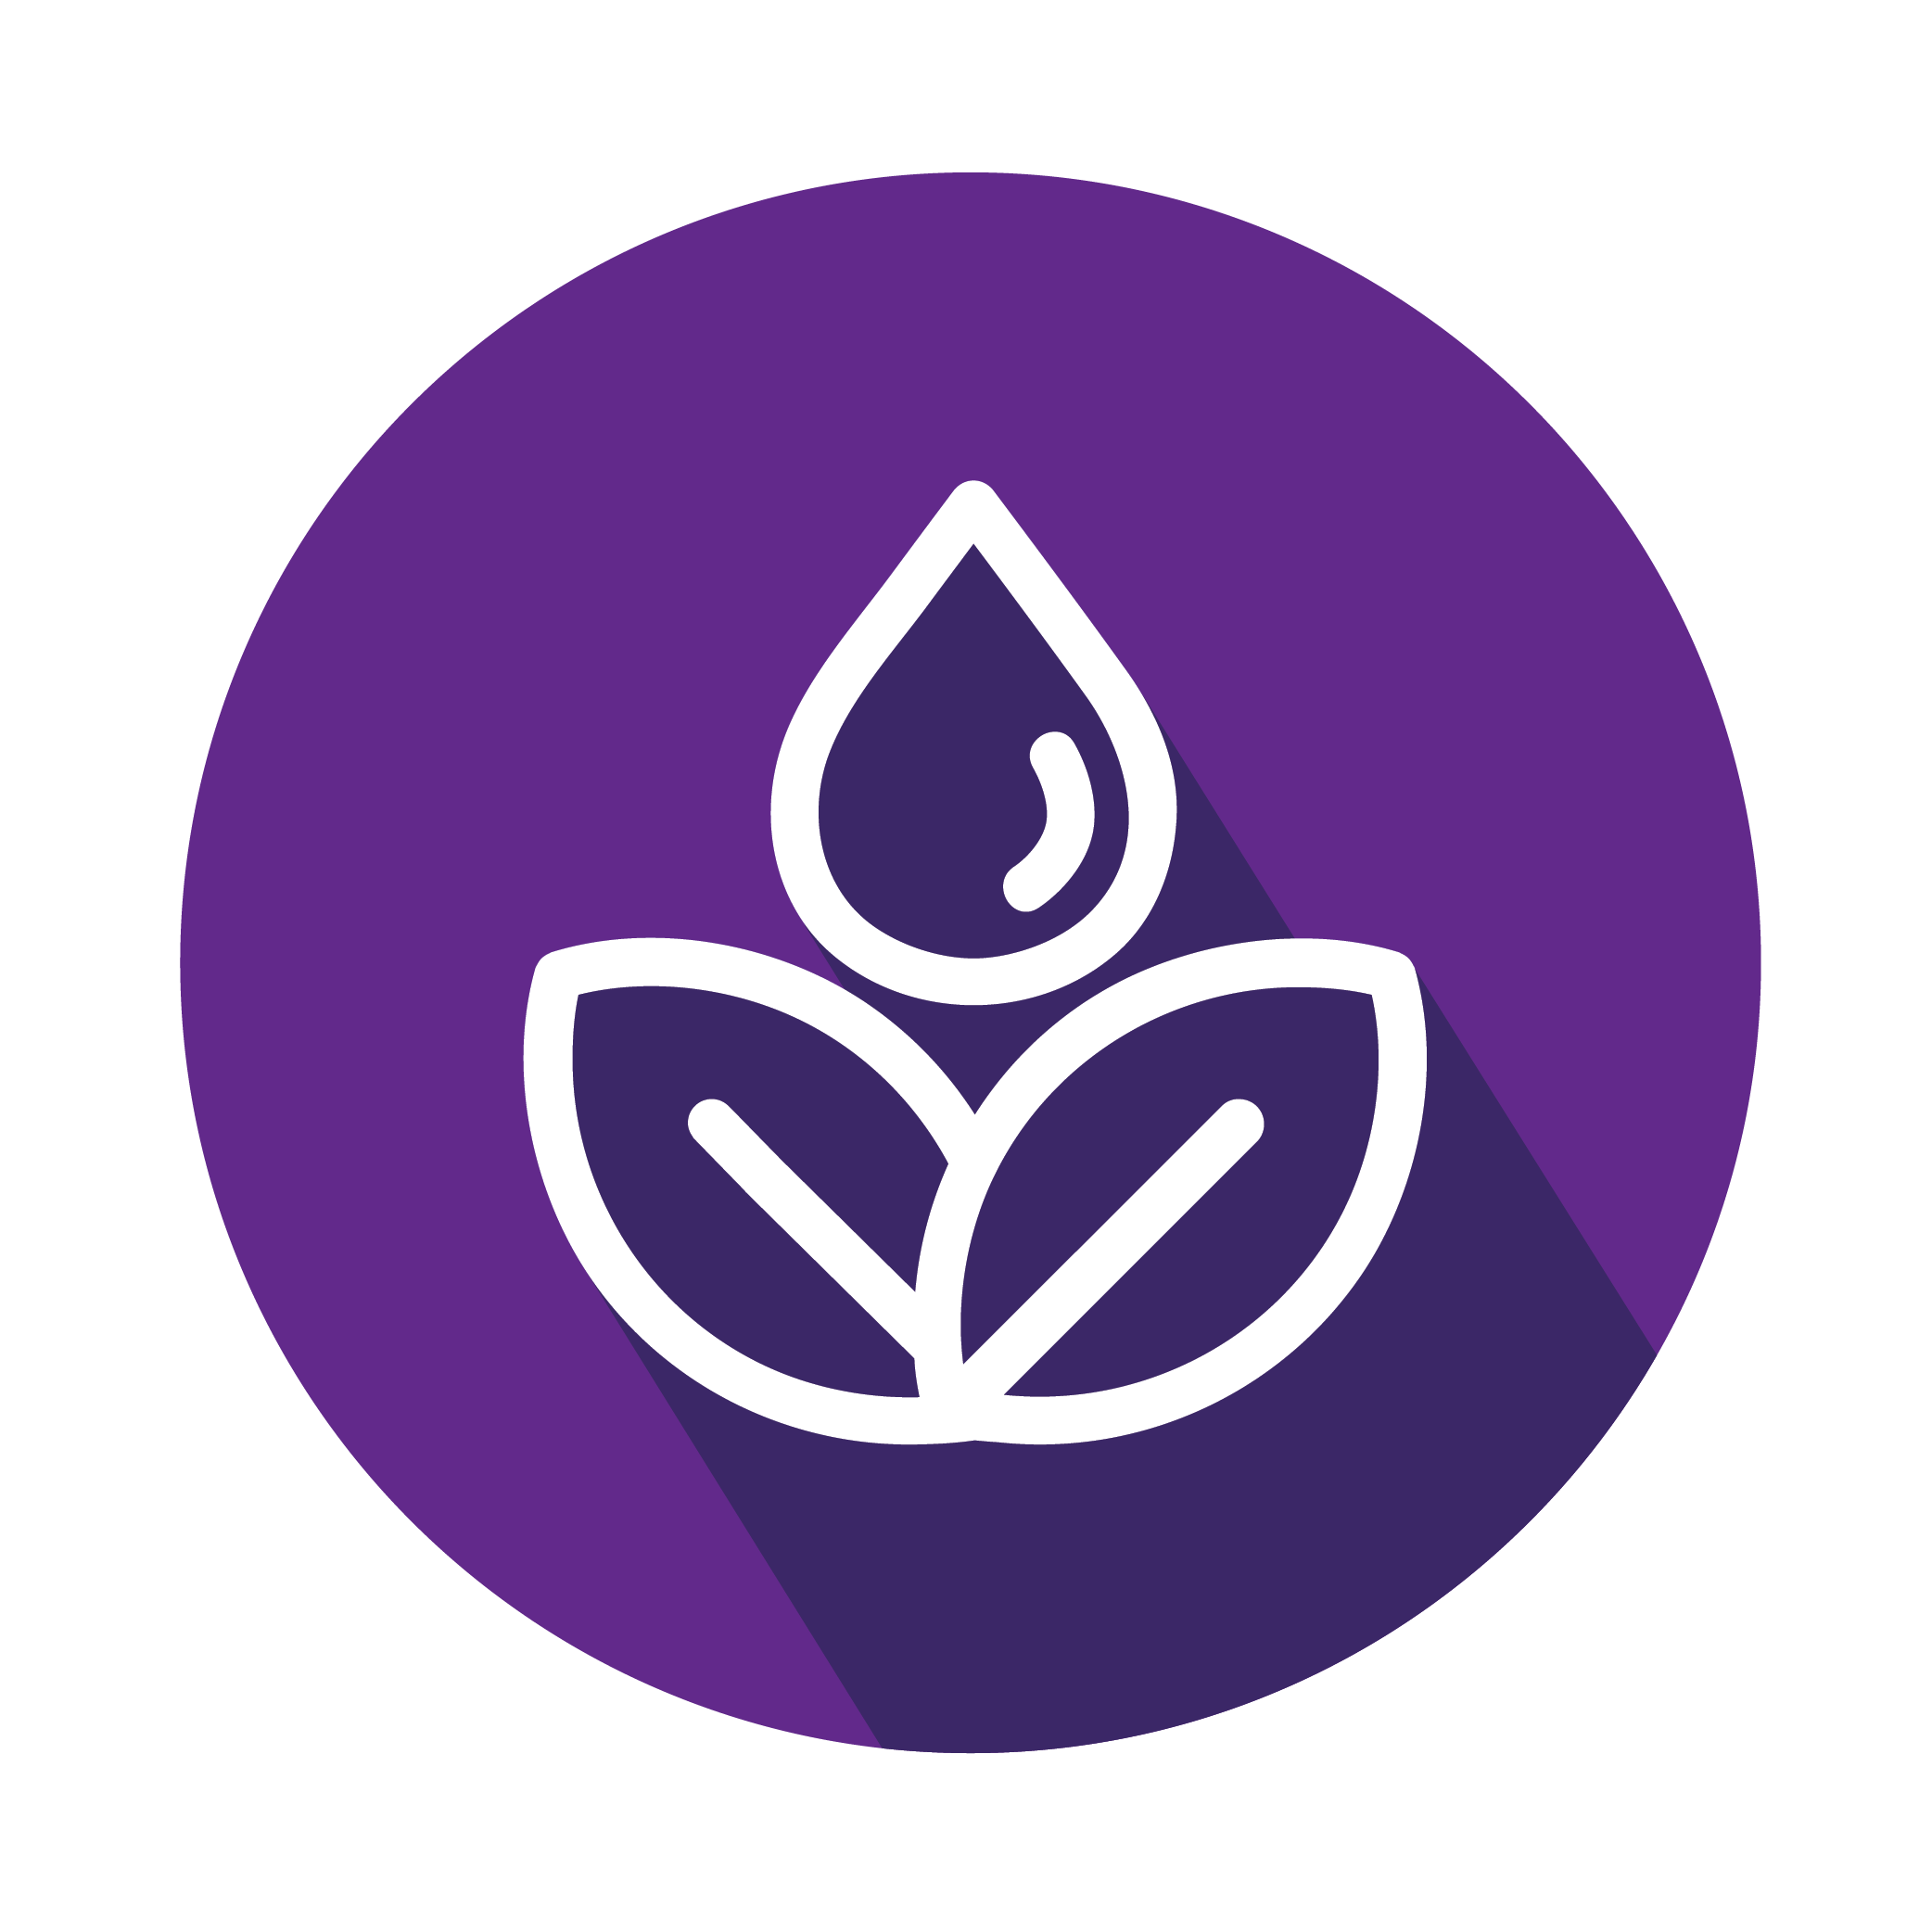 The health and wellness logo which is a leaf and water droplet on purple